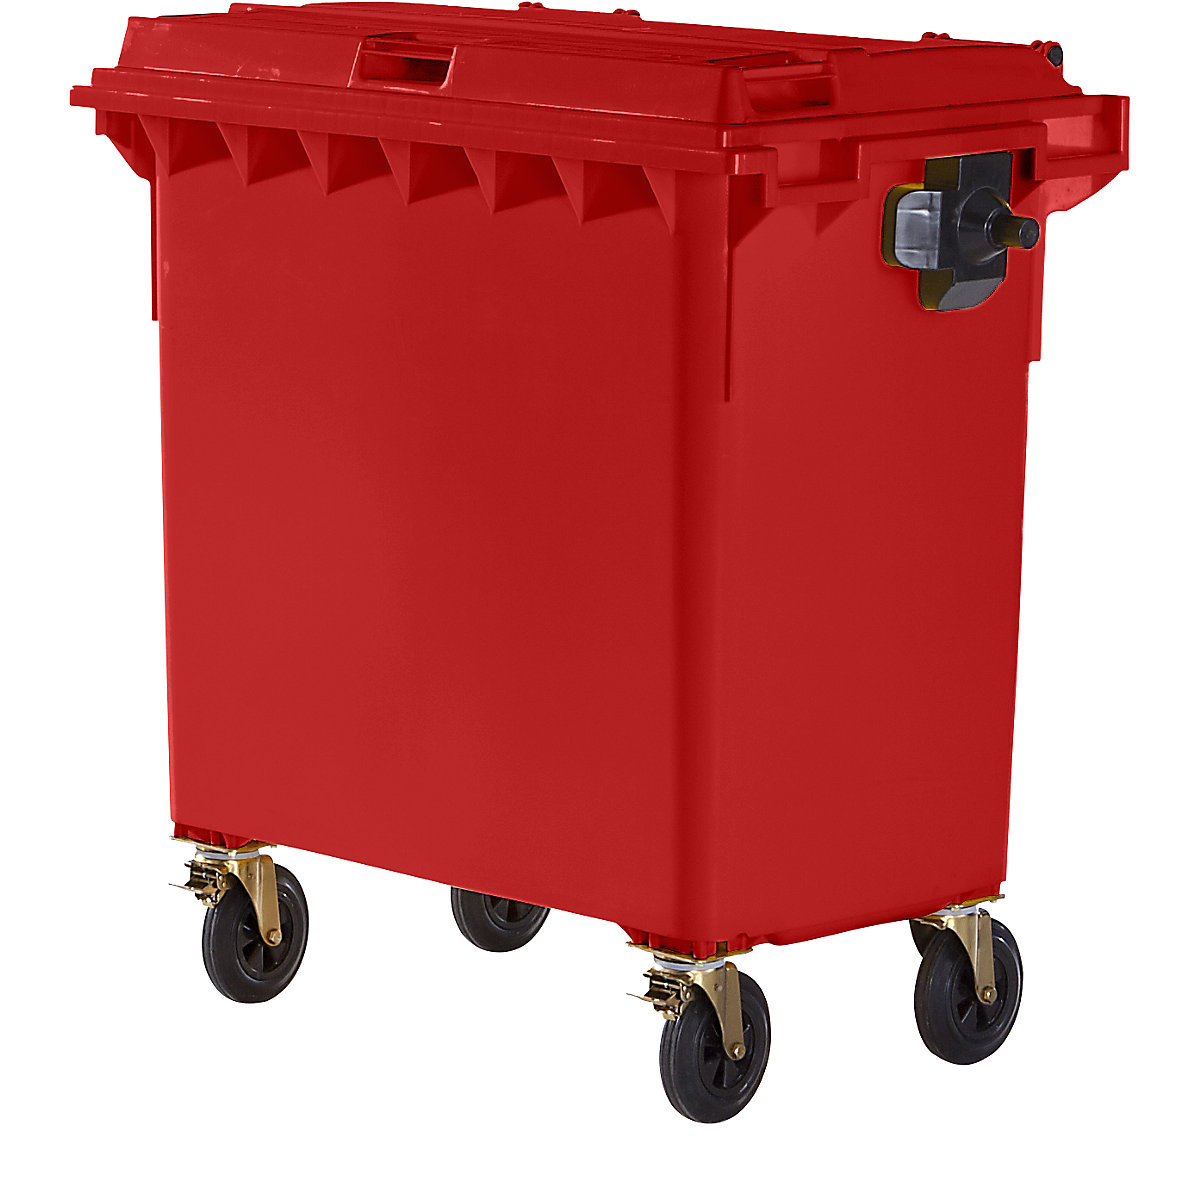 Plastic waste container, DIN EN 840, capacity 770 l, WxHxD 1360 x 1330 x 770 mm, red-6